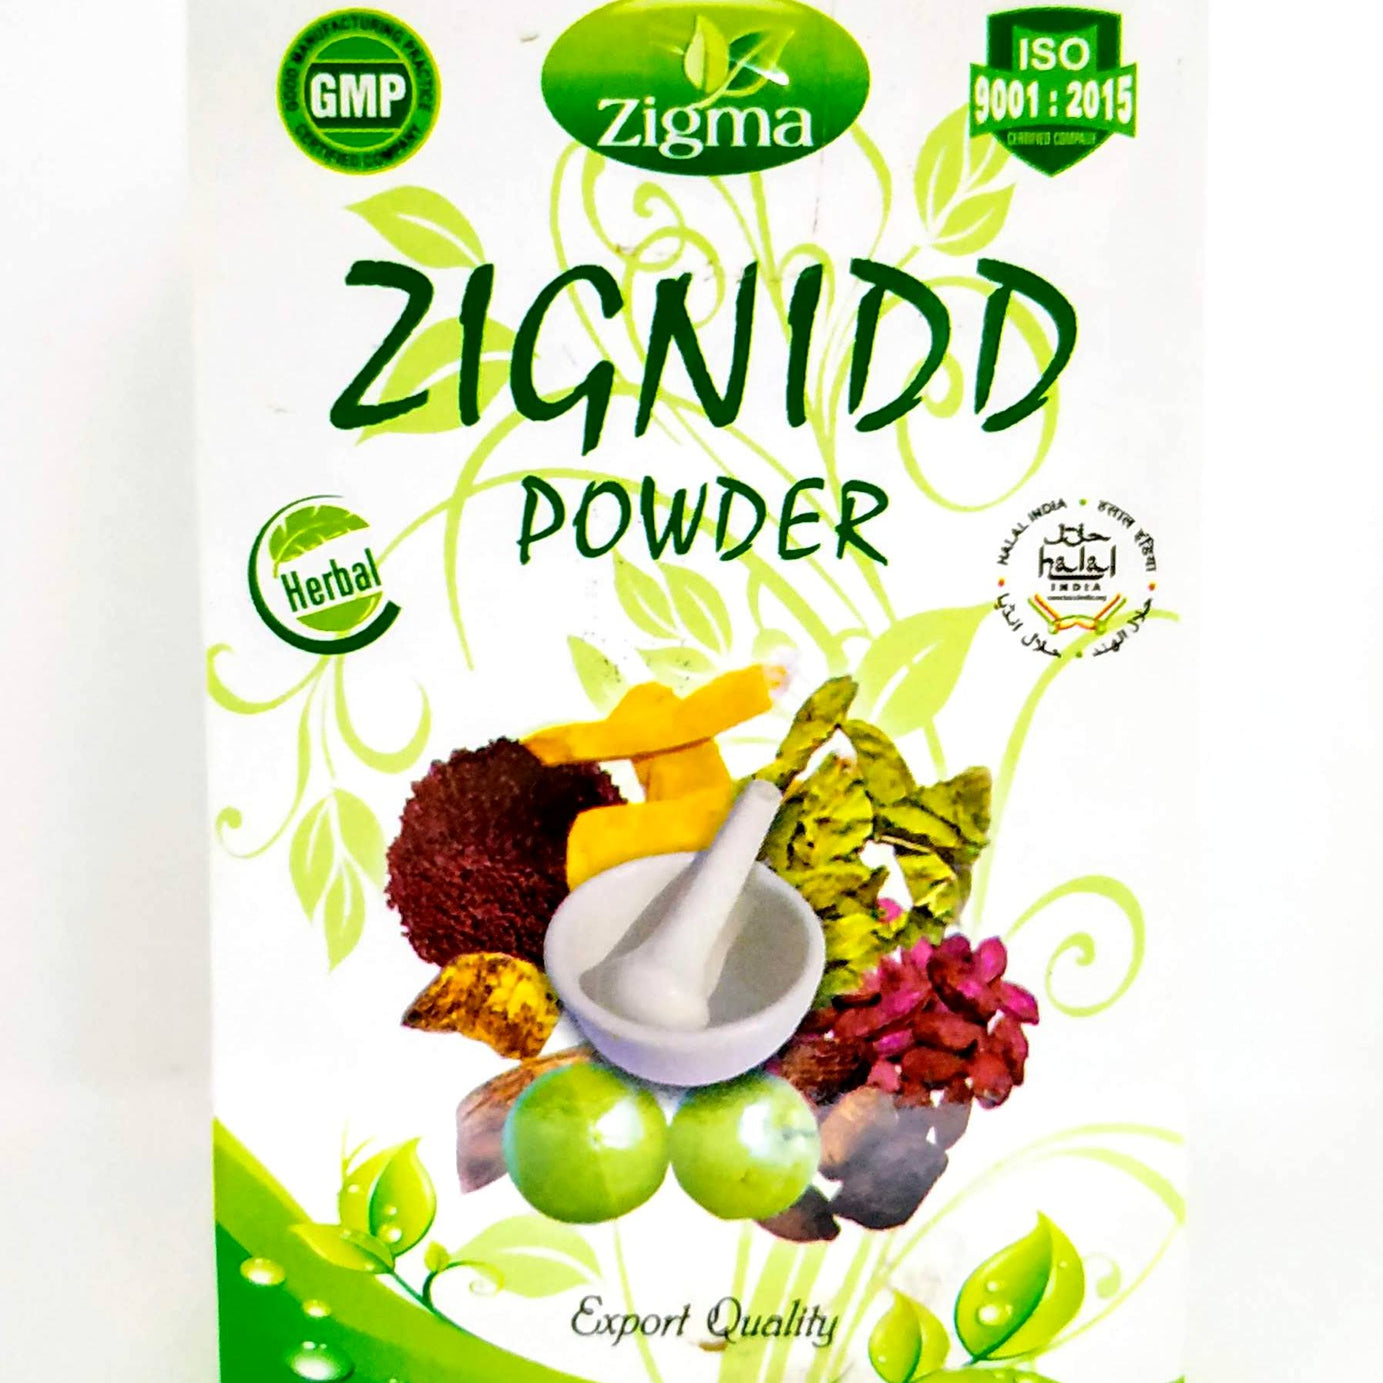 Shop Zignidd Powder 100gm at price 185.00 from Zigma Online - Ayush Care